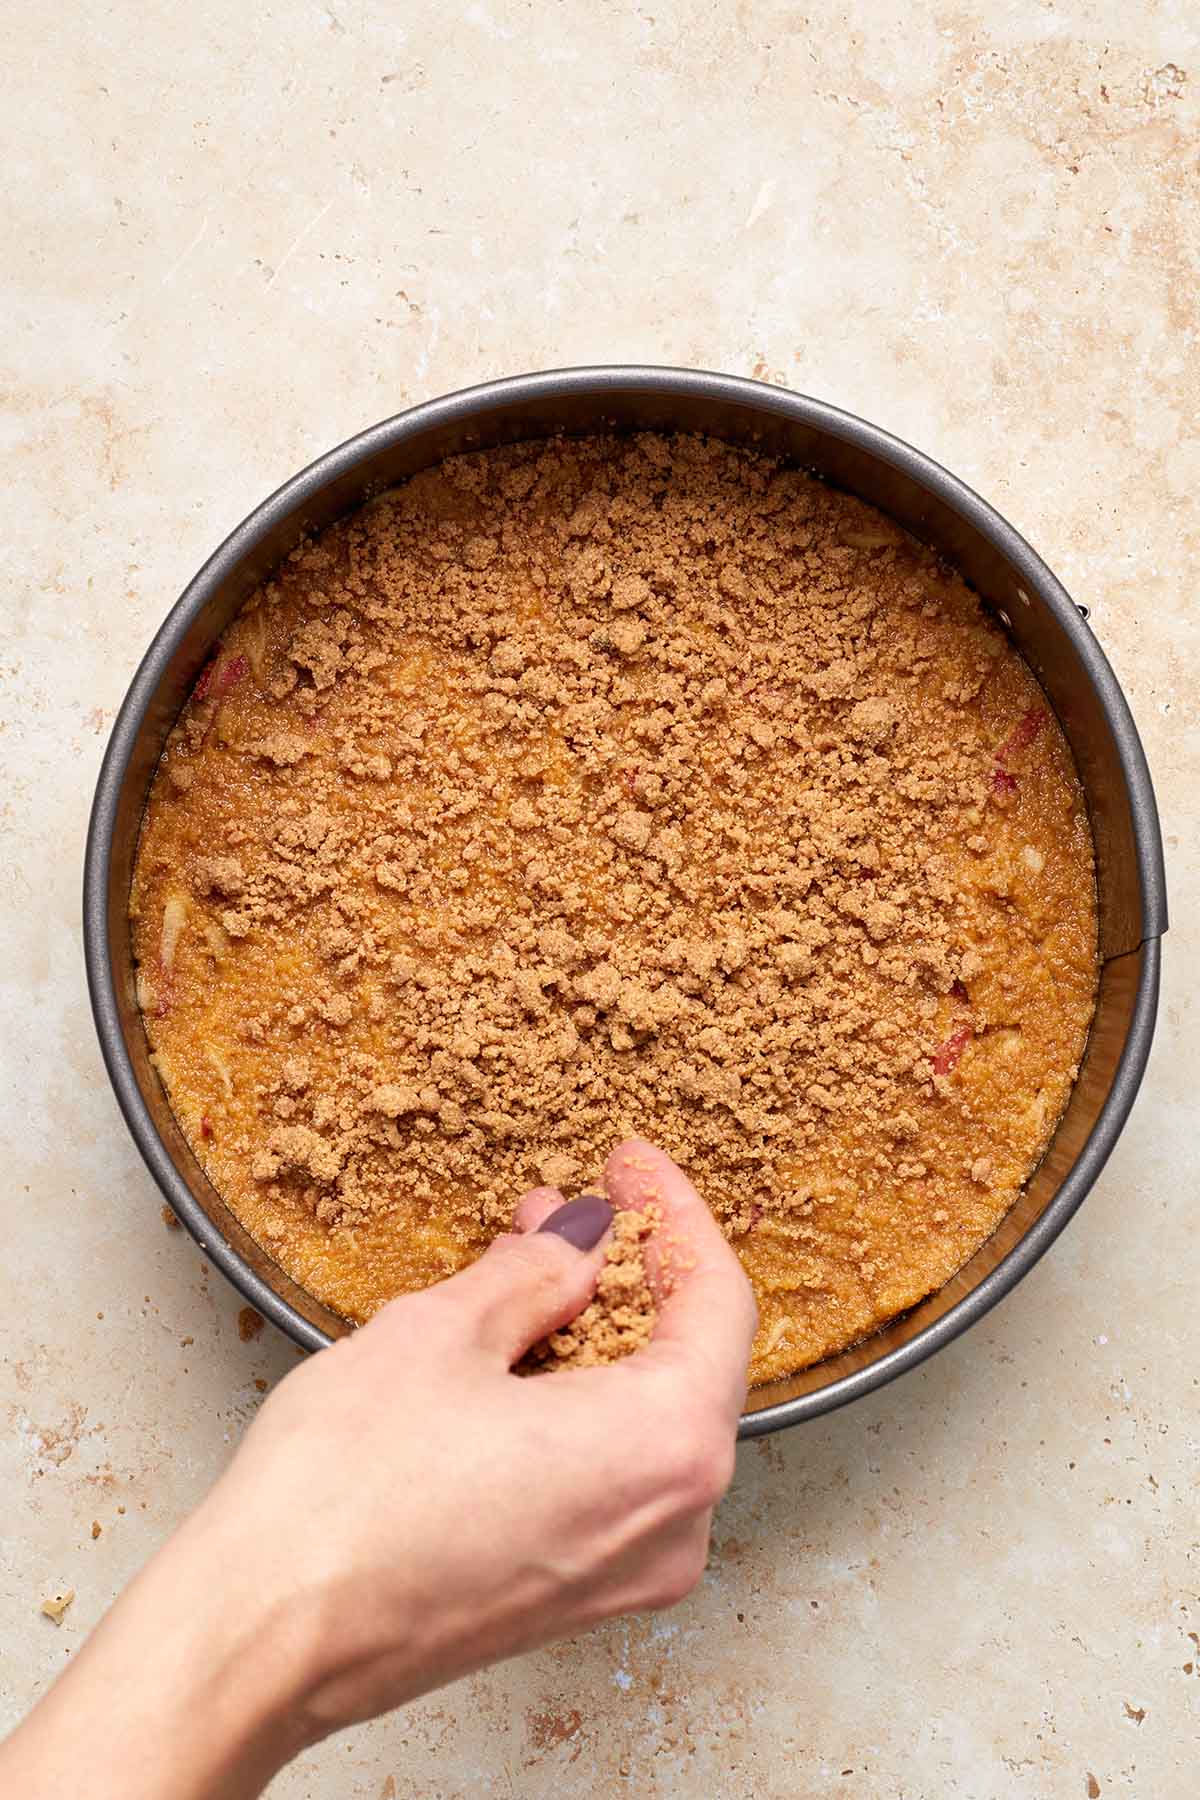 Streusel topping being scattered on top of cake batter in pan.